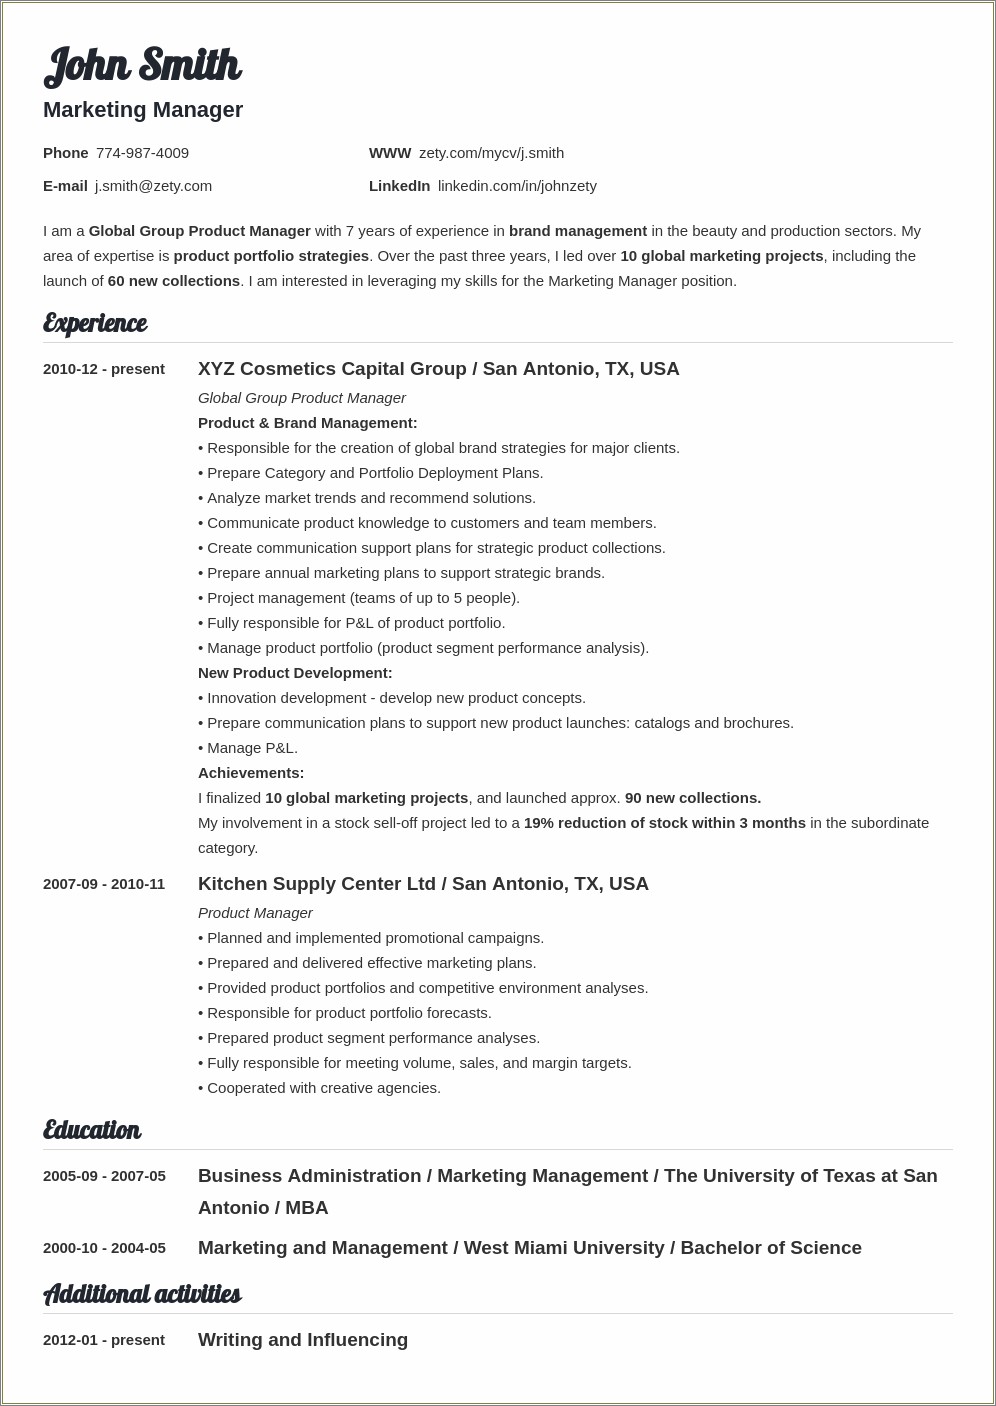 Putting School Experience On Resume After Graduation